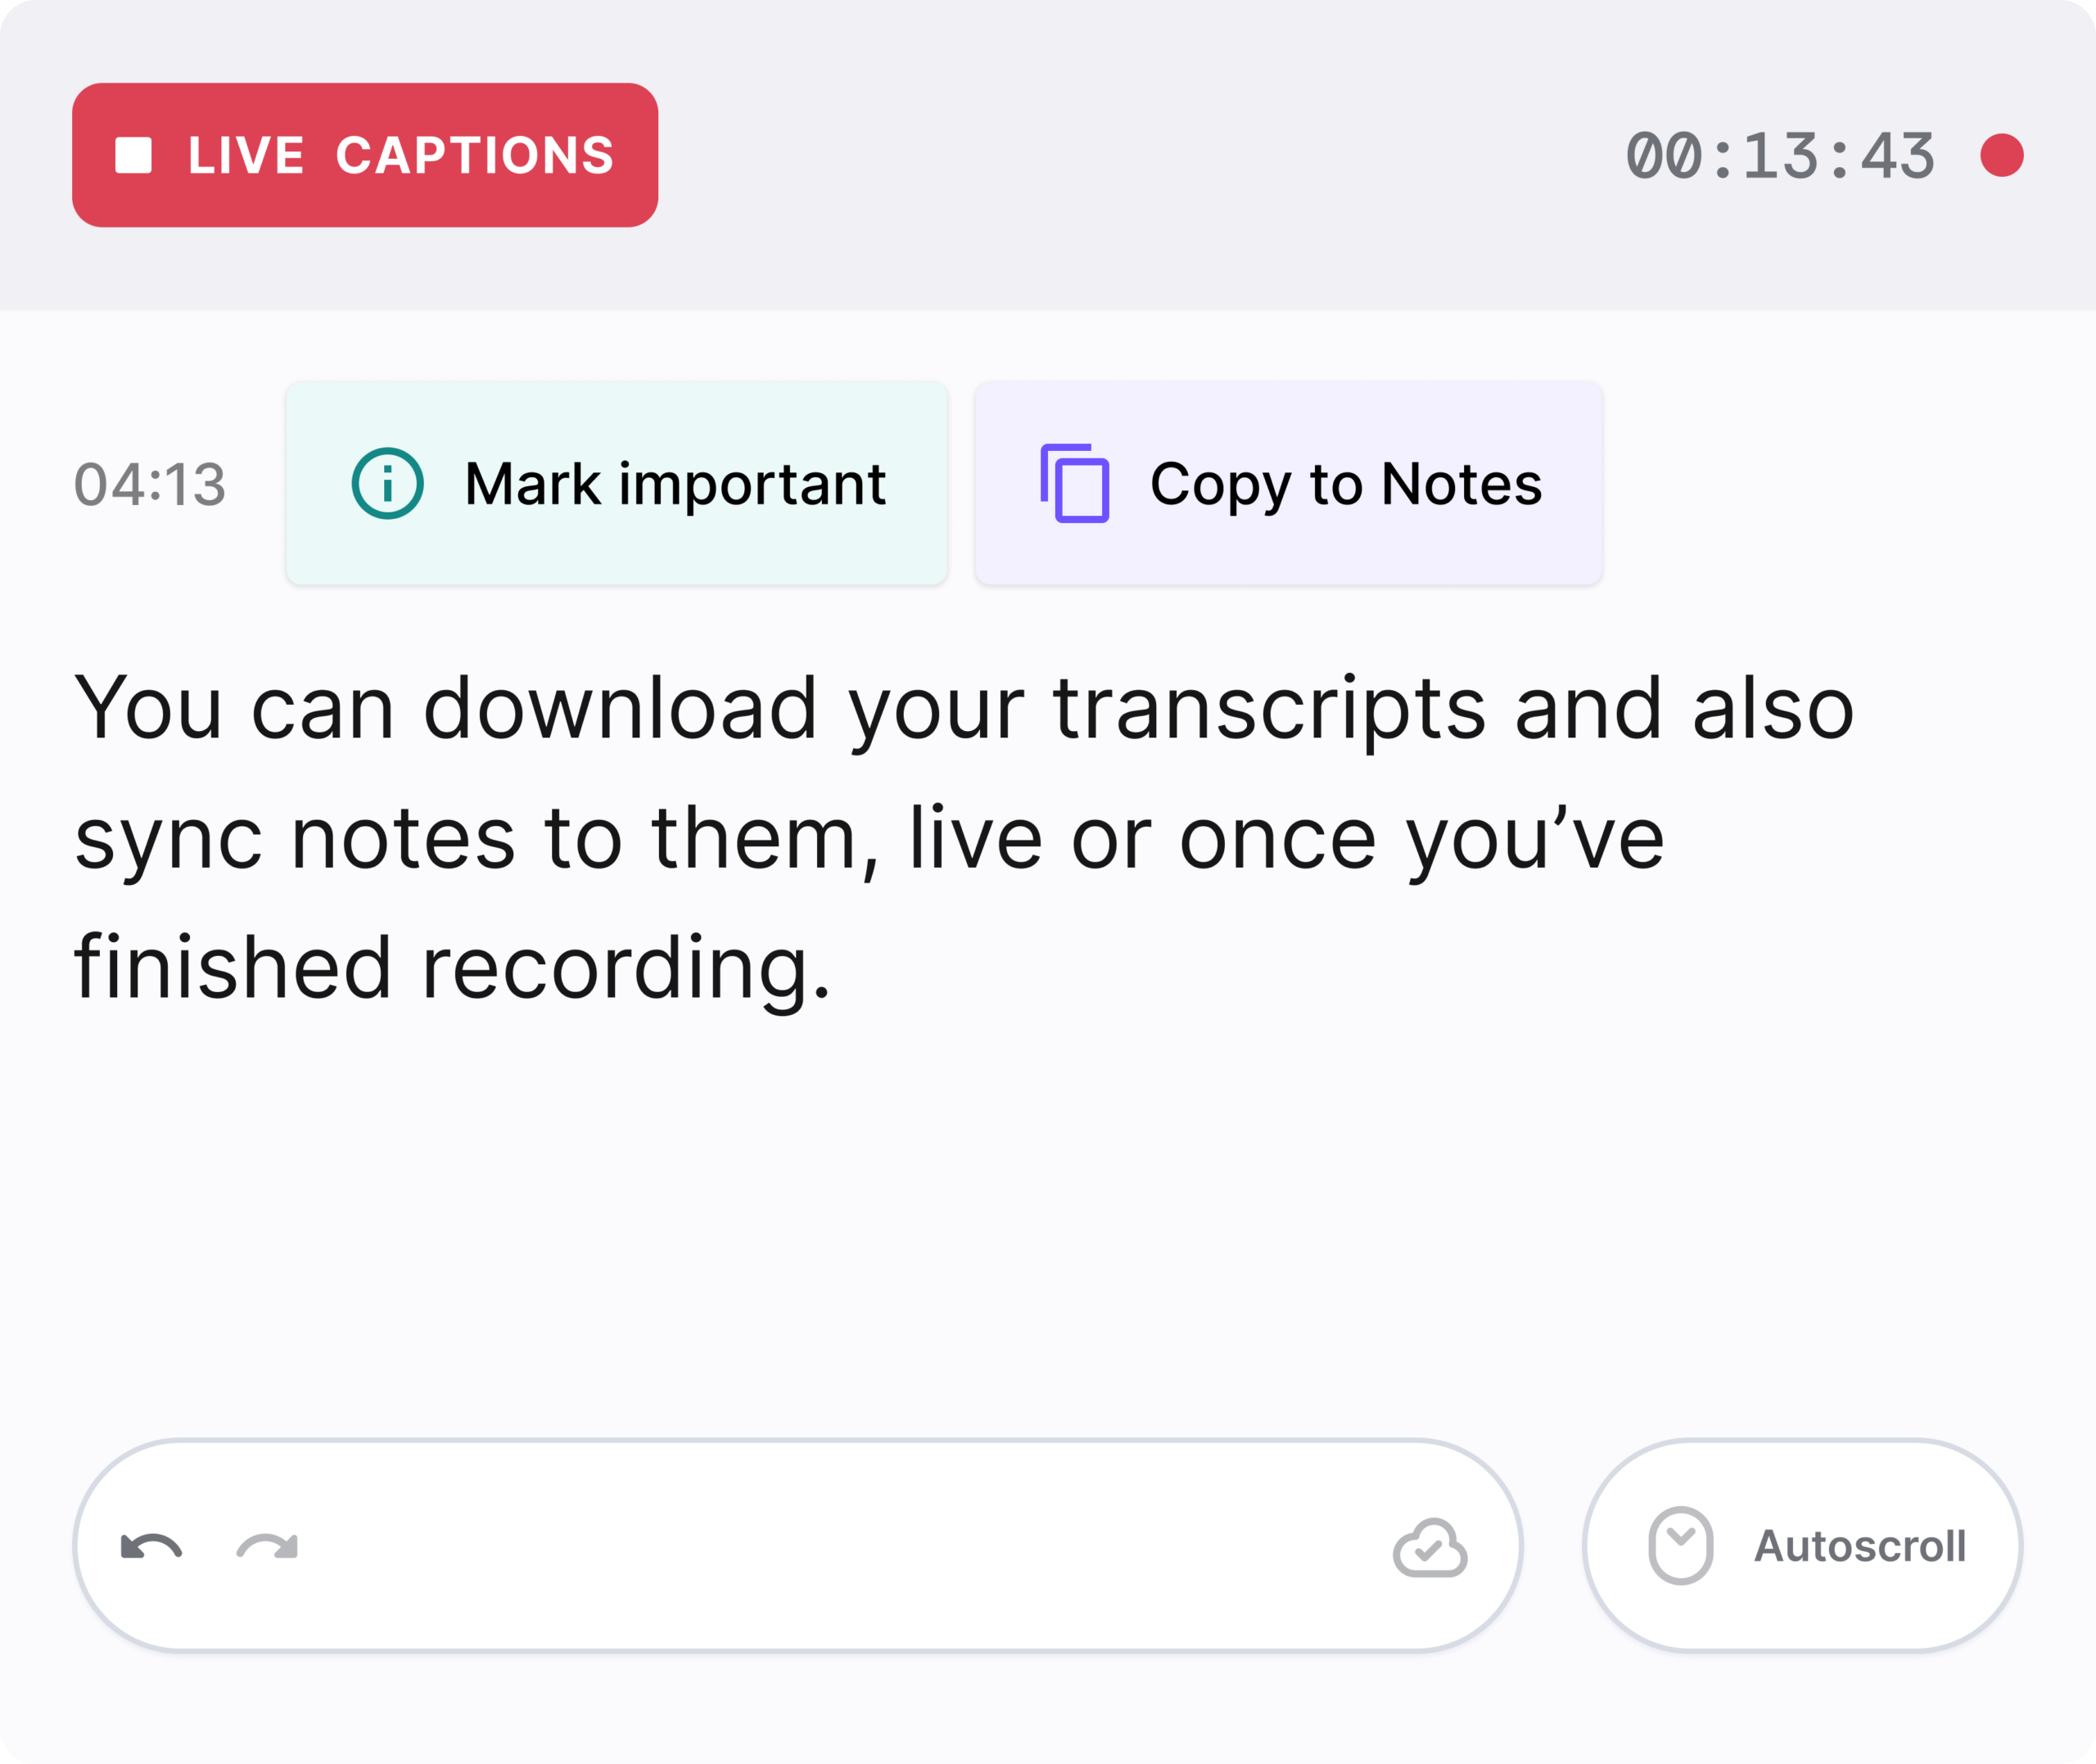 The Caption.Ed interface, with a red 'Live Captions' signal button at the top and the text: You can download your transcripts and also sync notes to them, live or once you've finished recording.